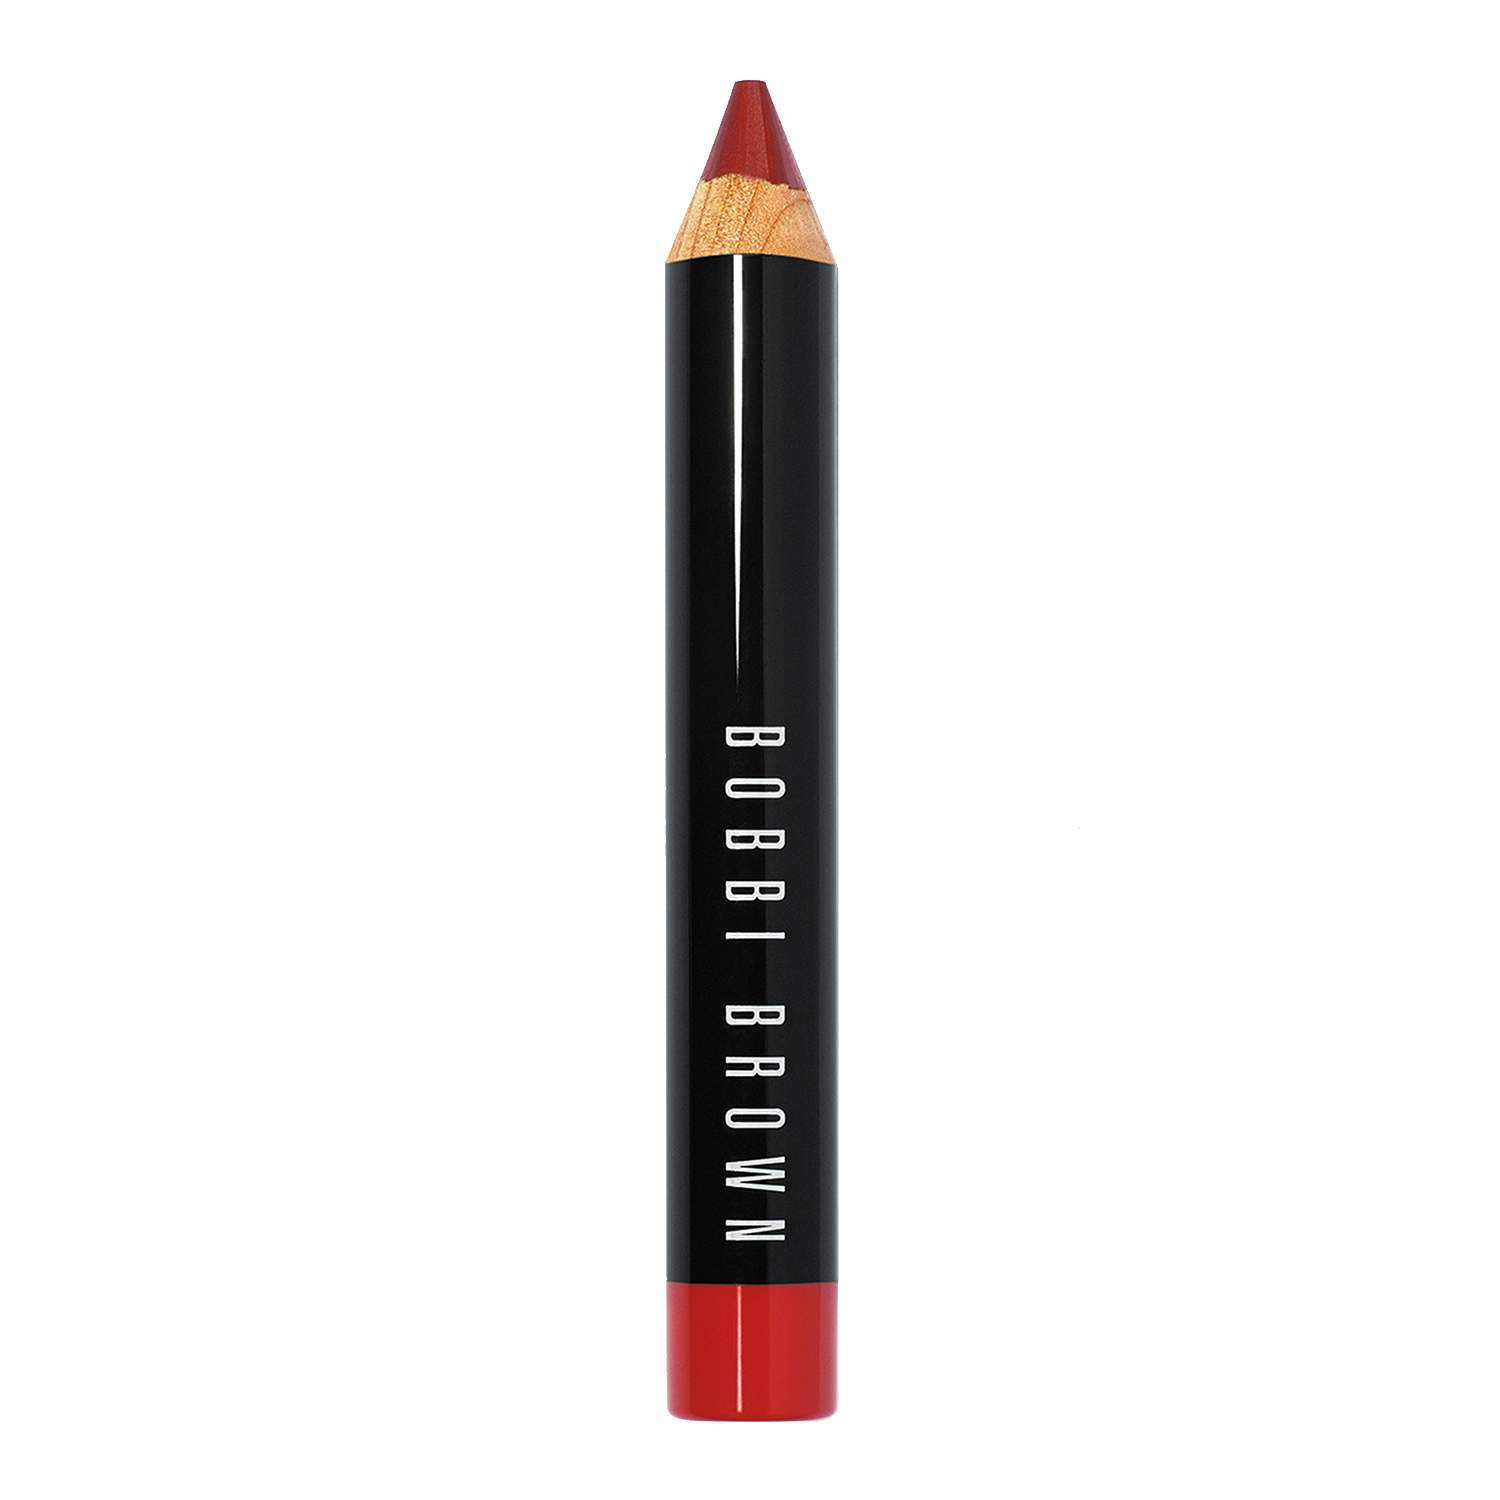 Bobbi Brown Art Stick Bobbi Brown Art Stick - Harlow Red 1